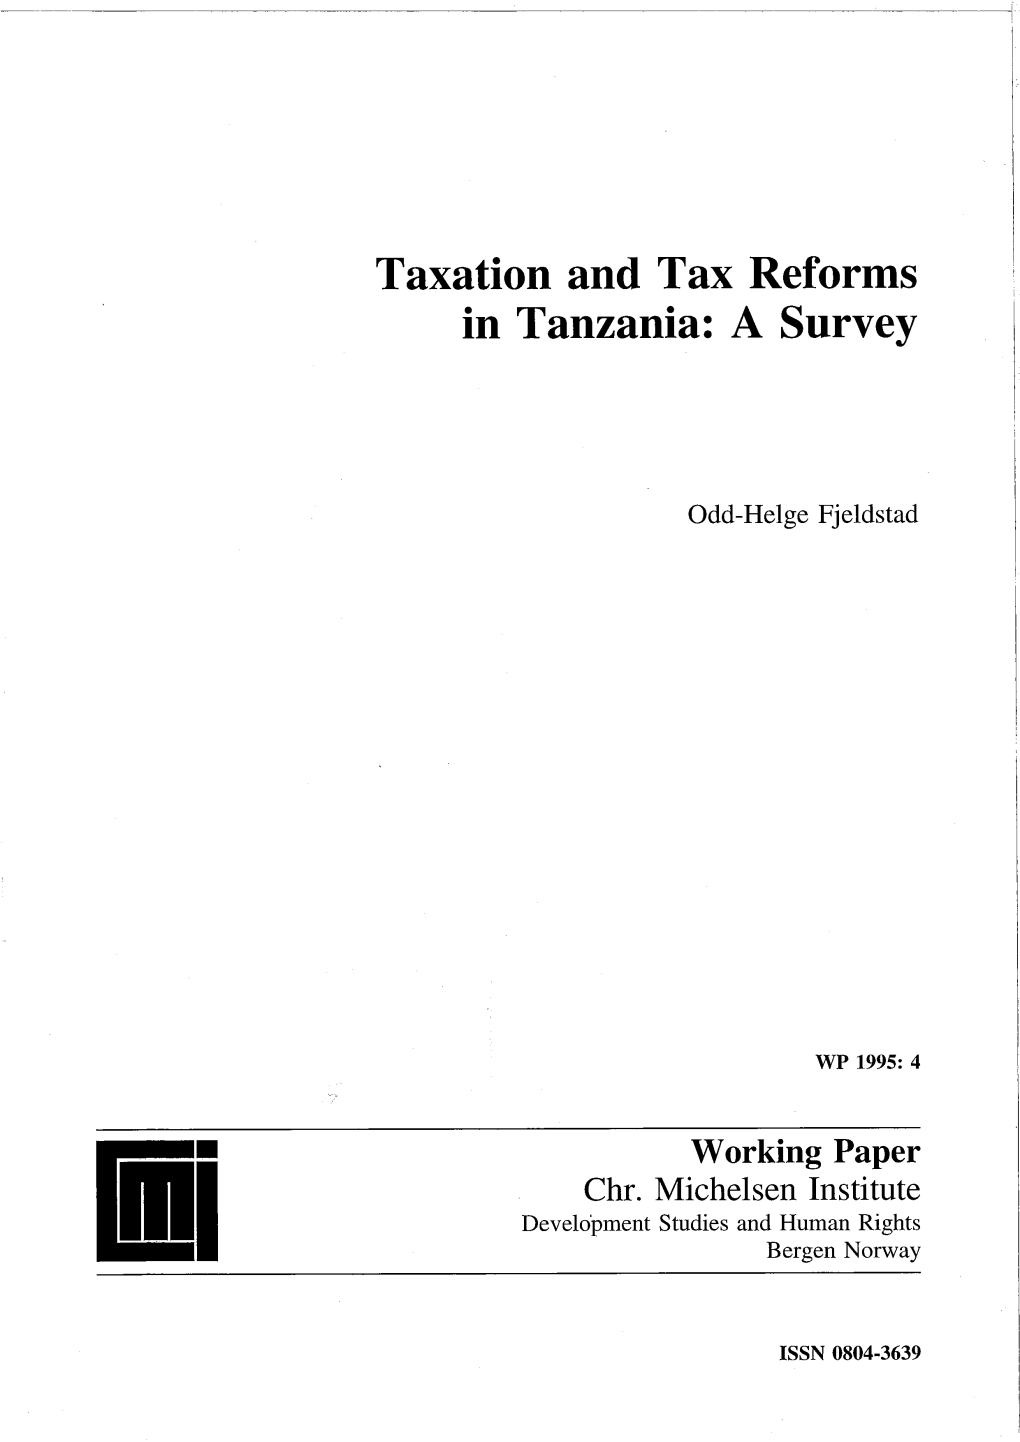 Taxation and Tax Reforms in Tanzania: a Survey